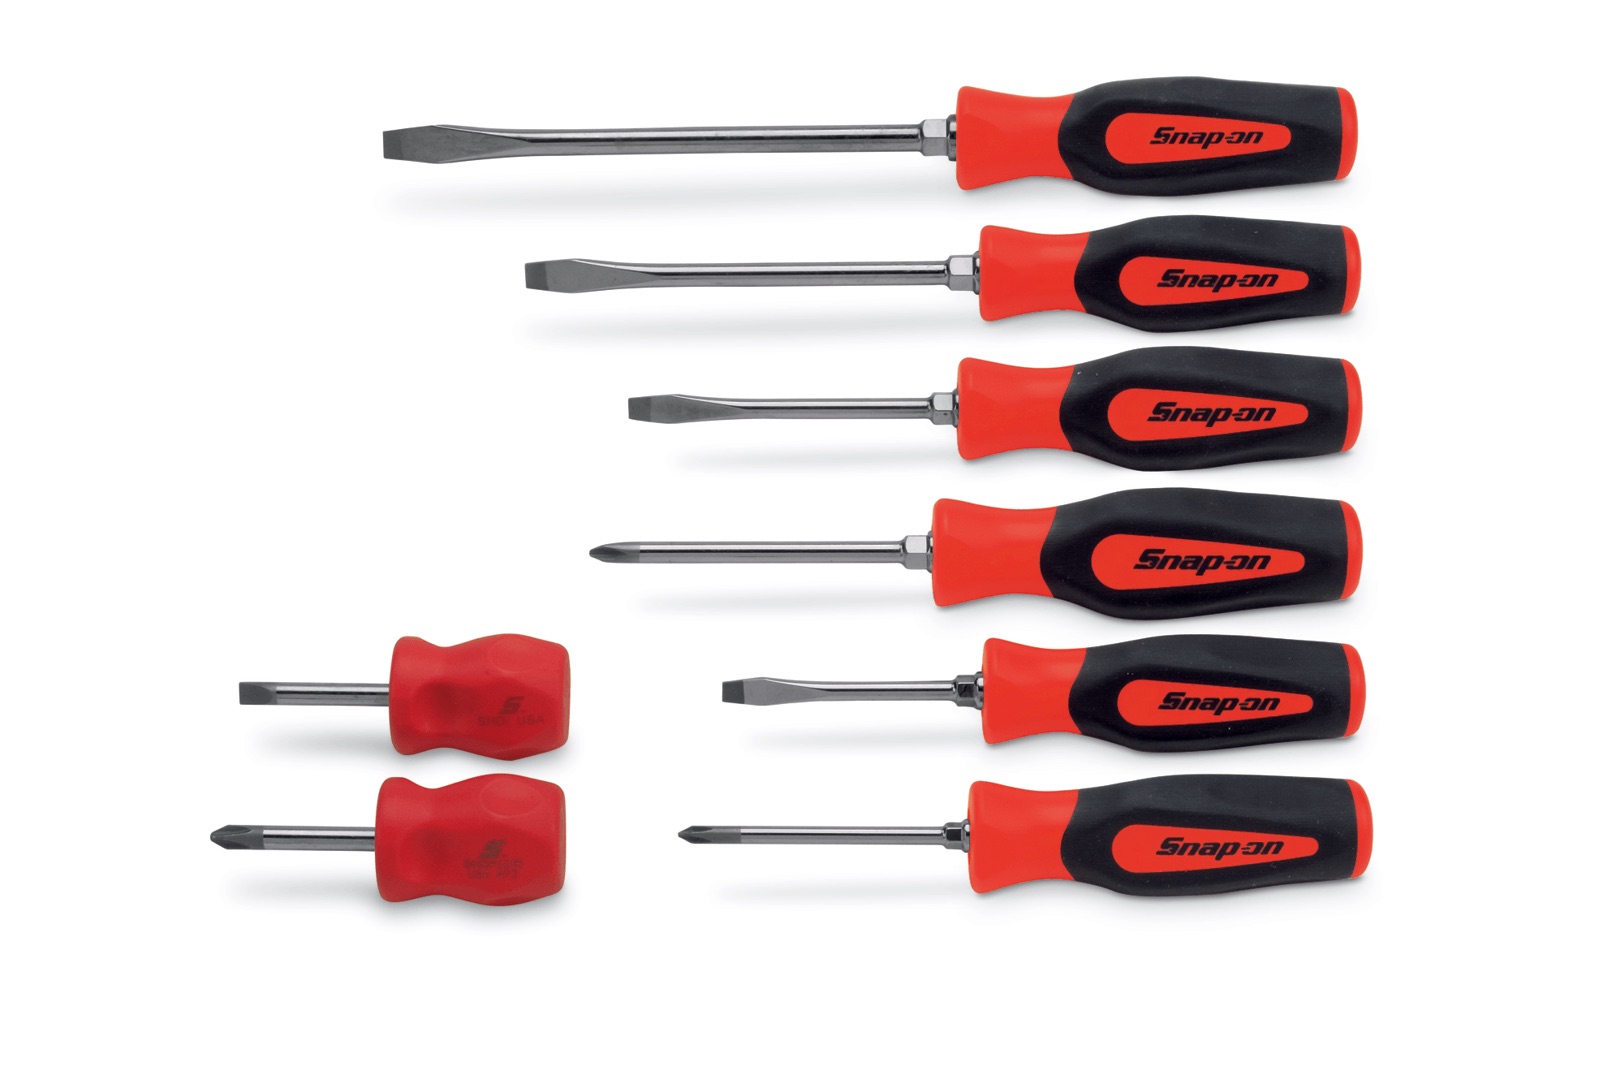 Where Are Snap-On Hand Tools Made